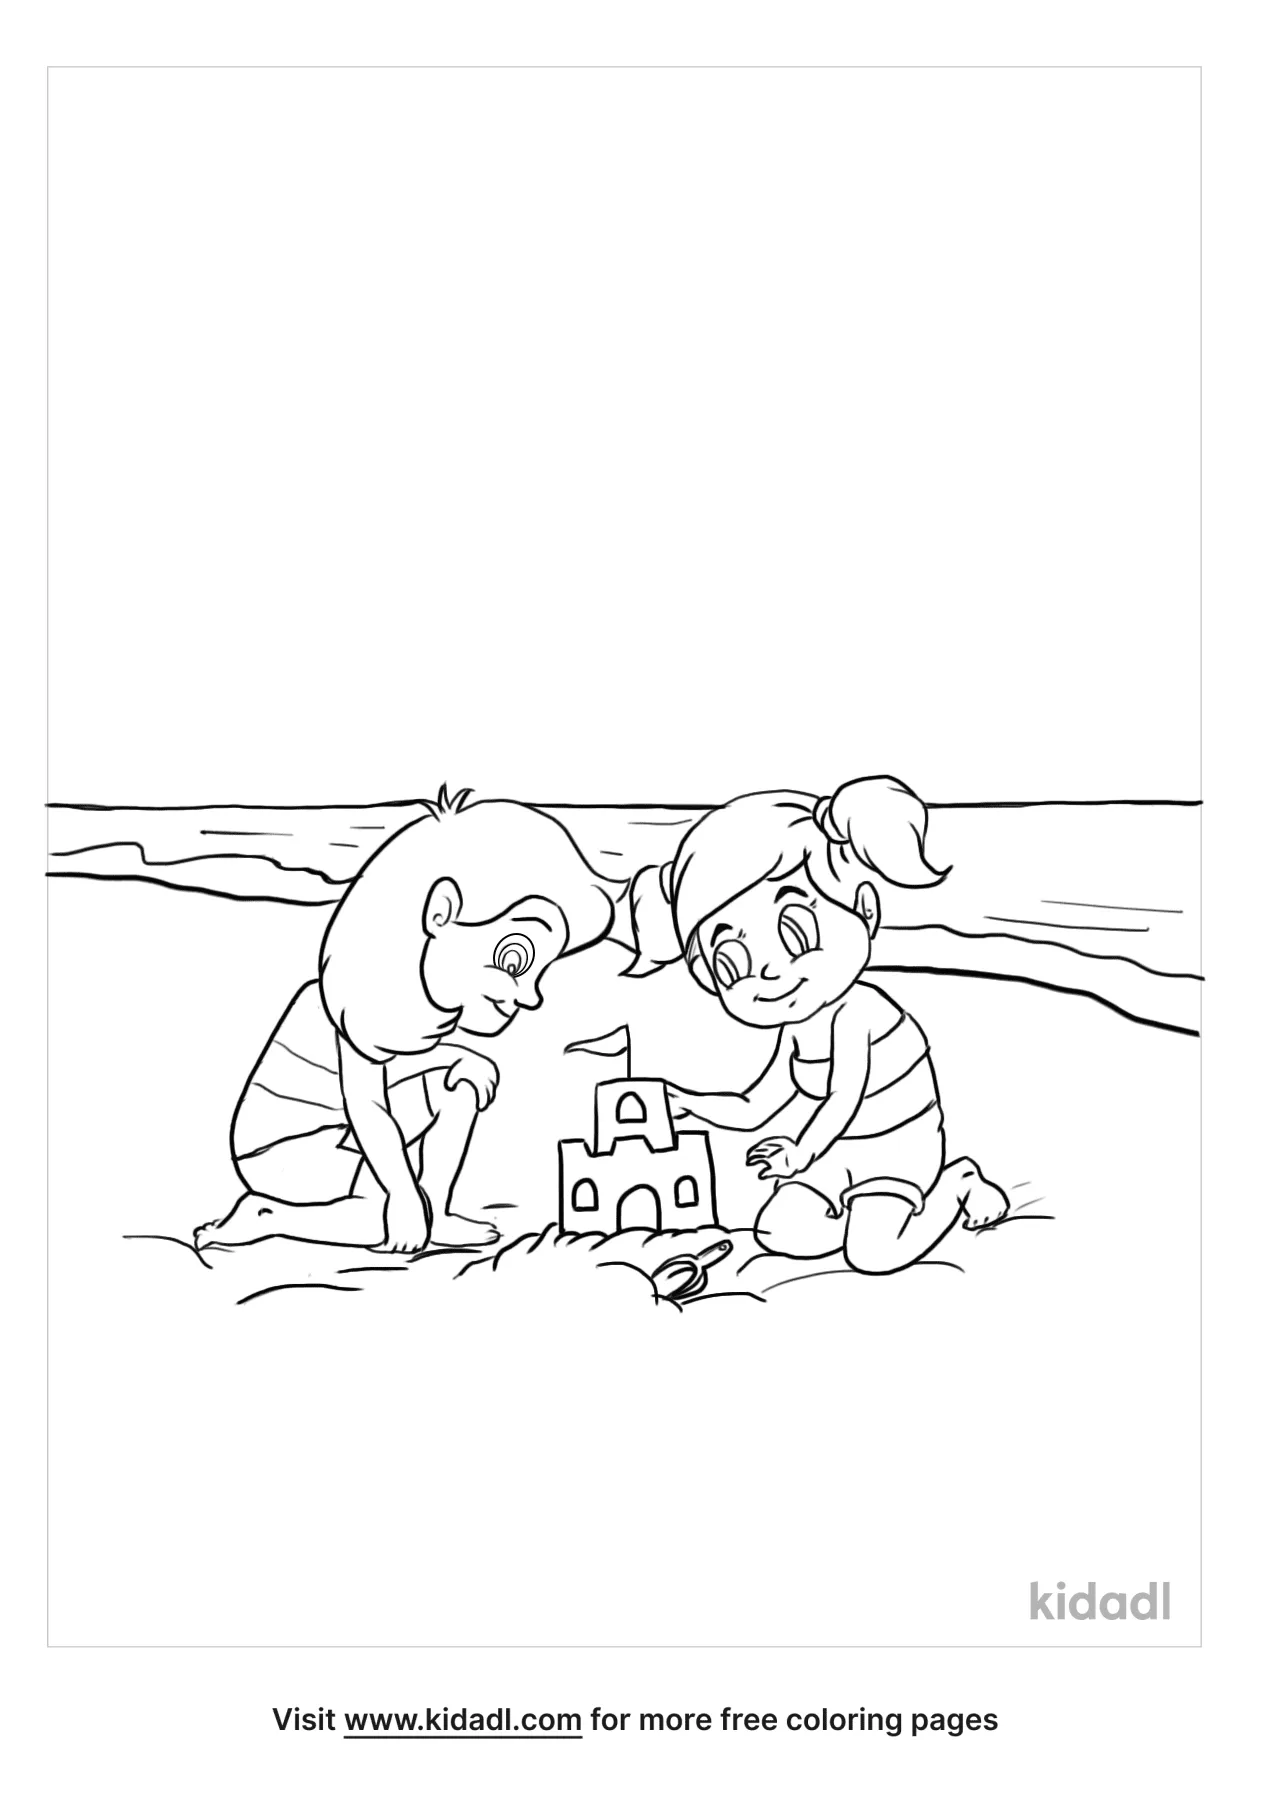 Beach Girl Coloring Page